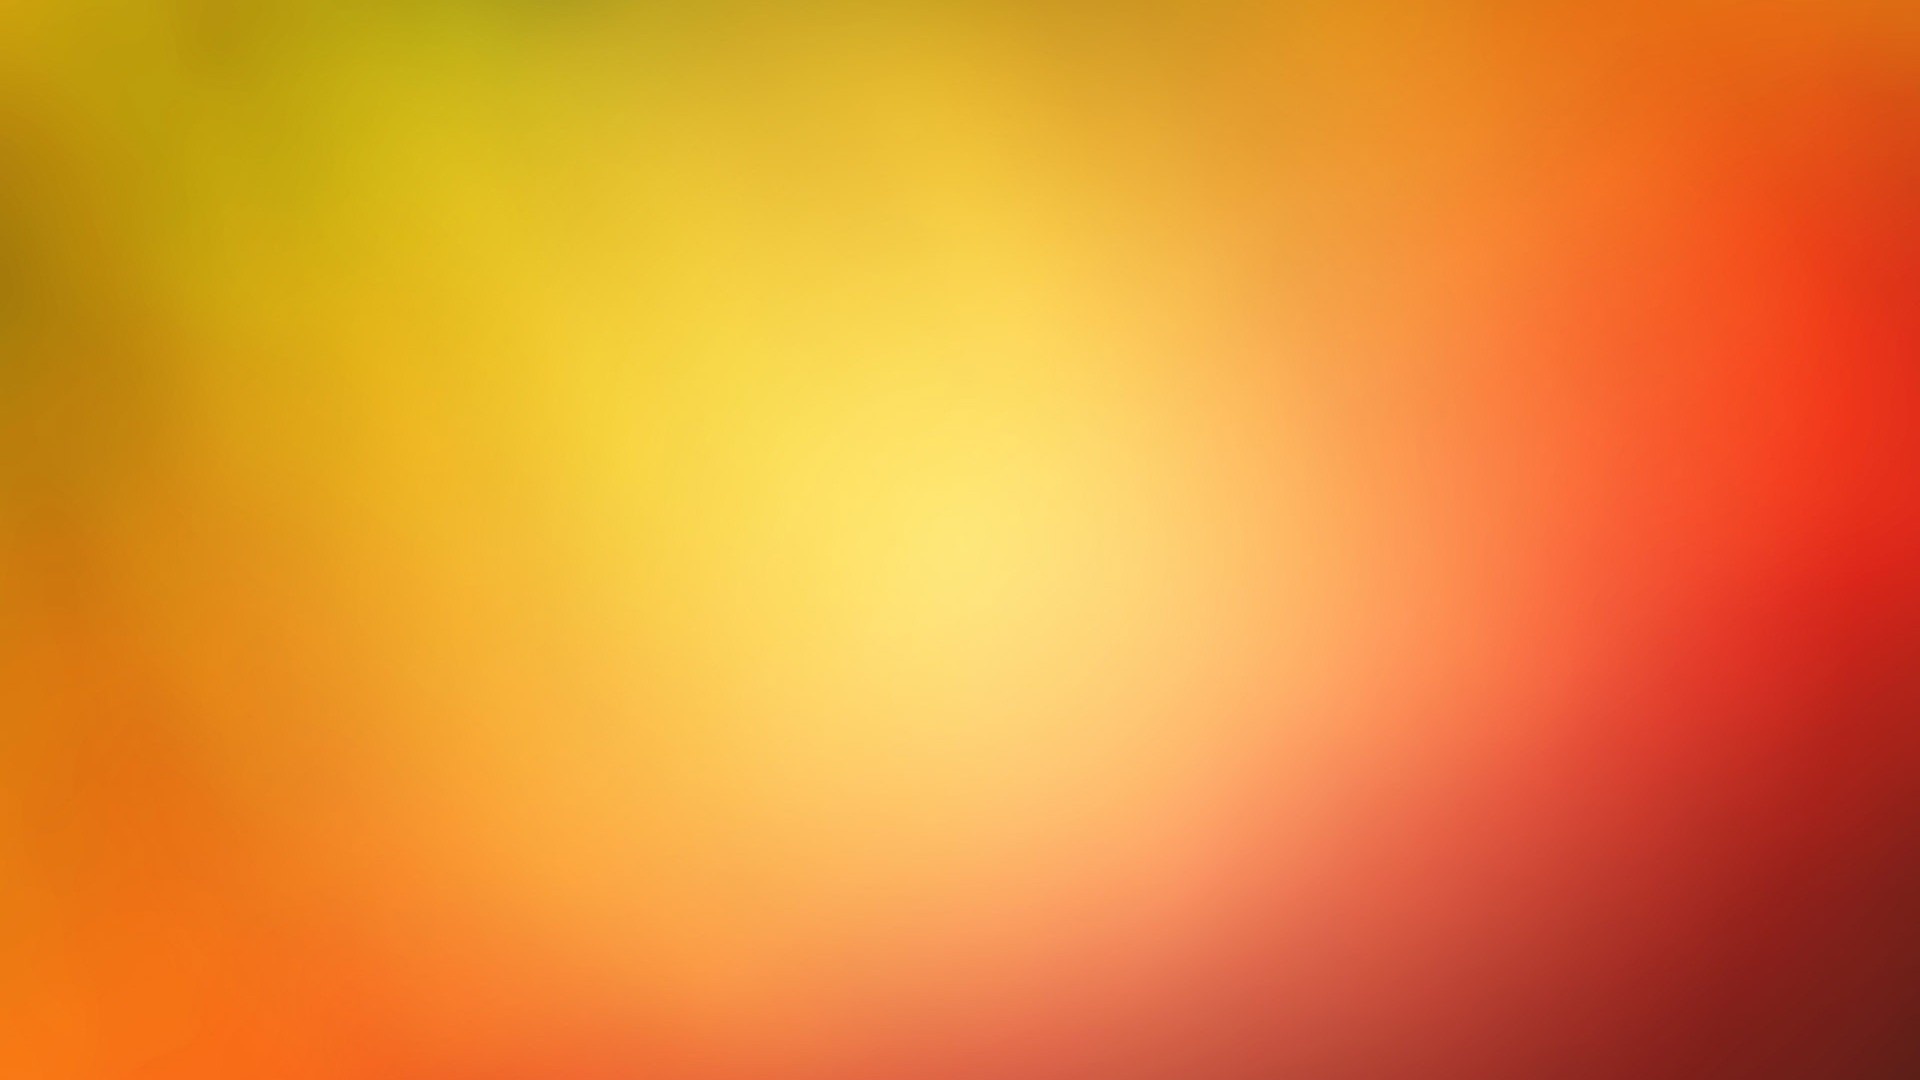 1920x1080 Bright Orange Backgrounds Images amp Pictures Becuo 